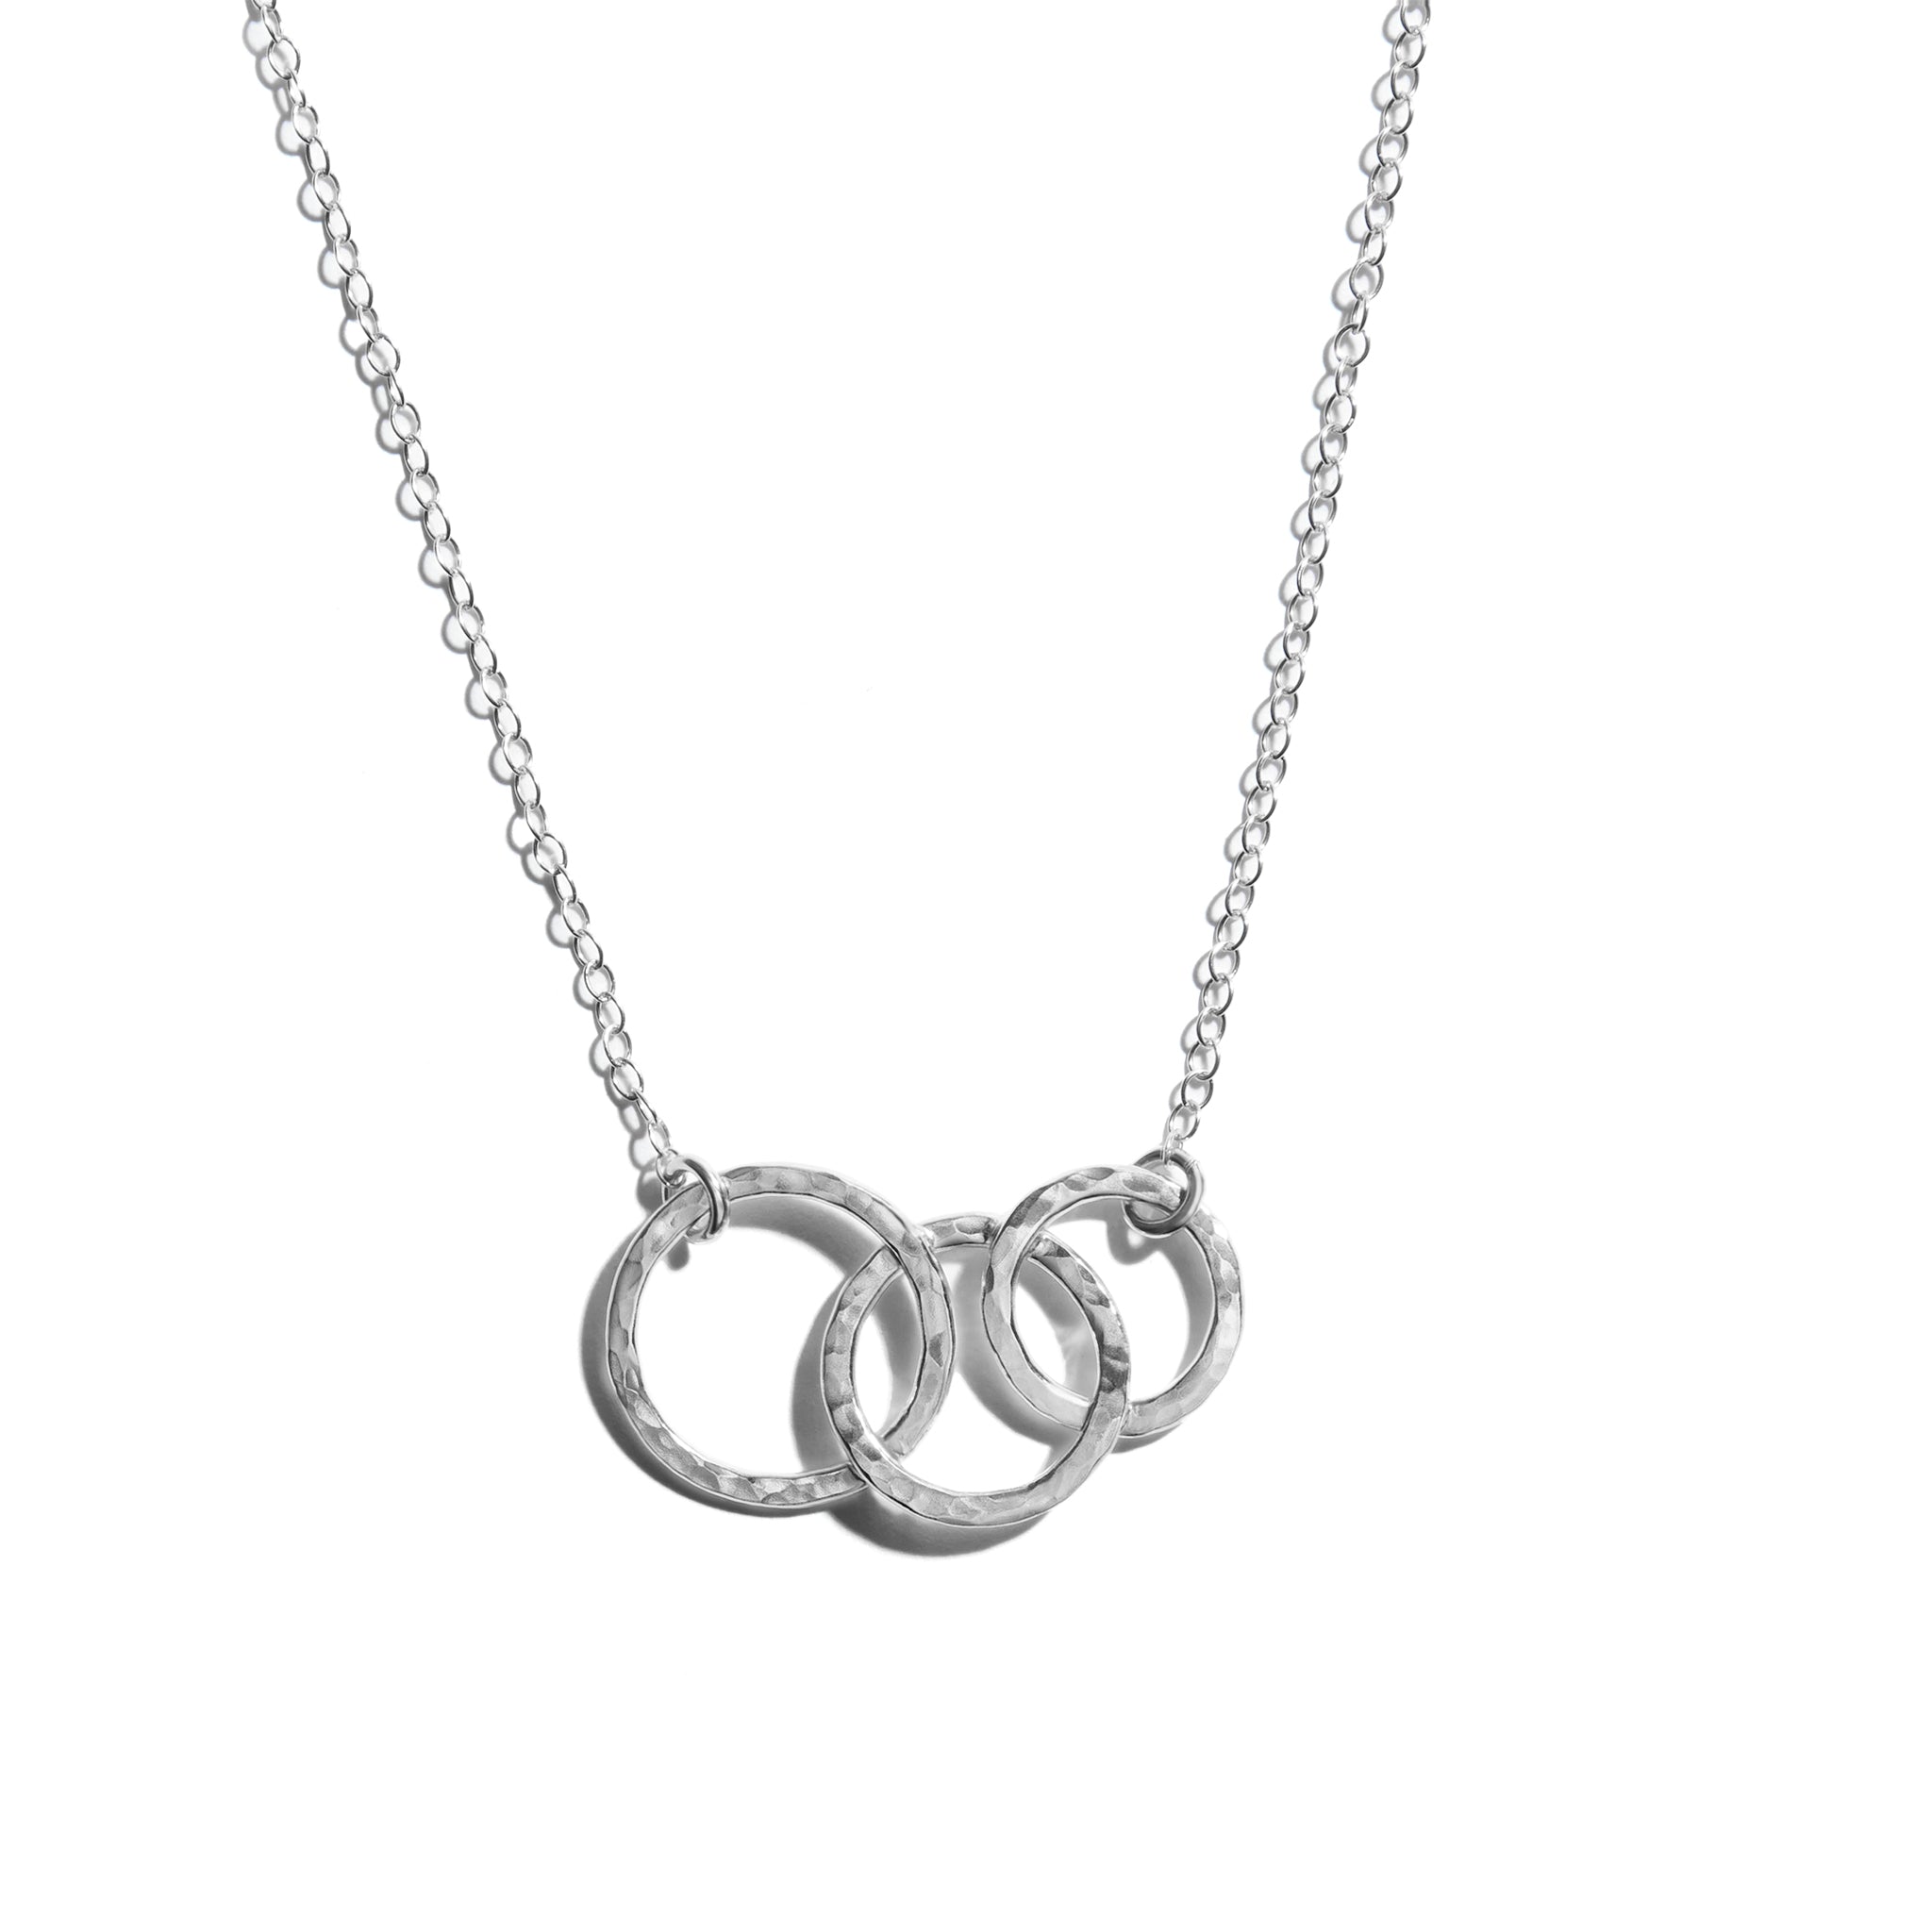 Close-up photo of triple circle necklace crafted from sterling silver. Perfect for adding elegance to any outfit.